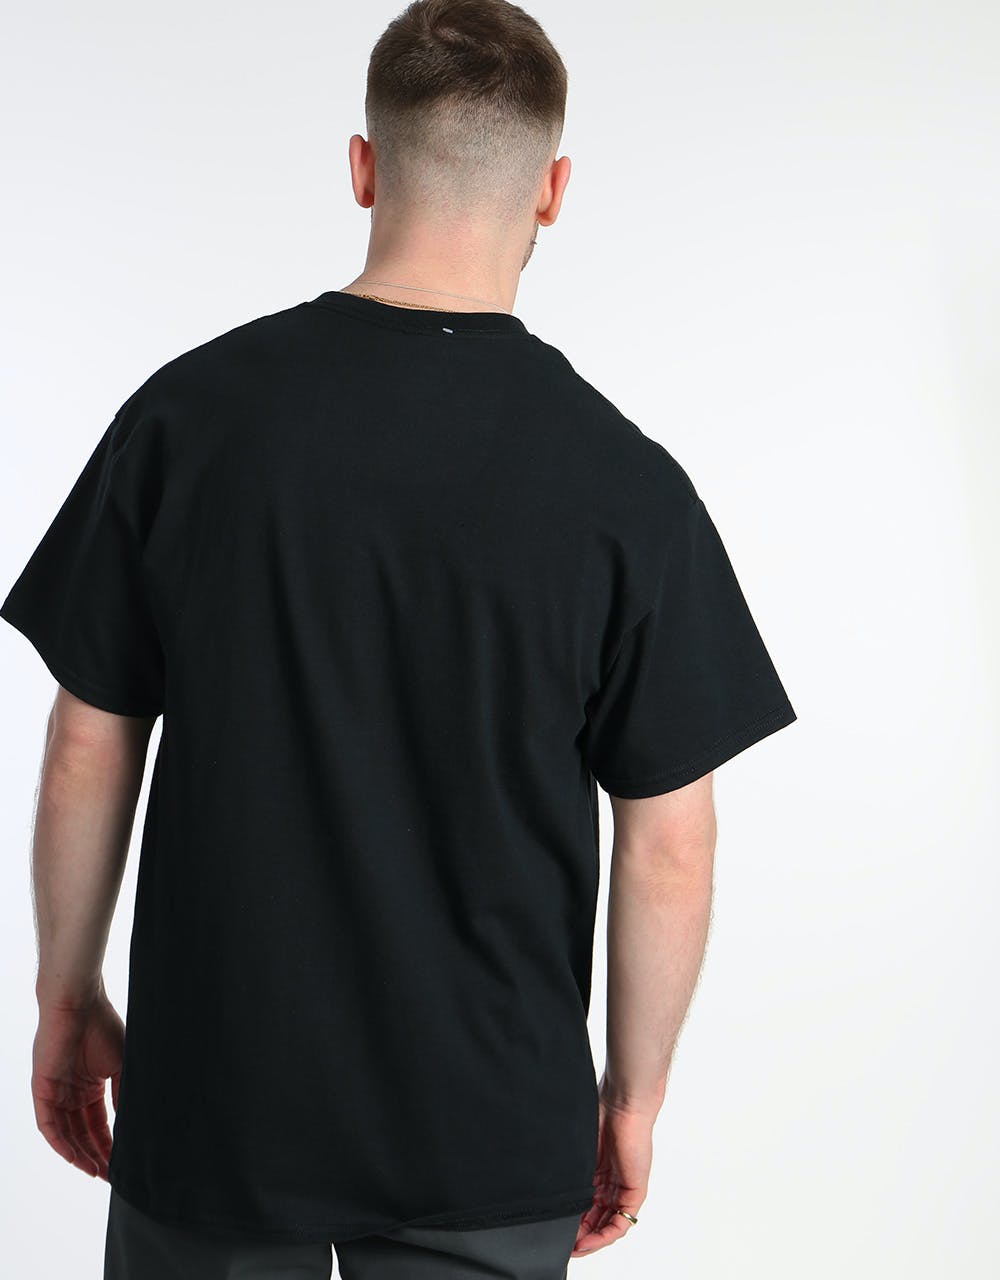 Route One Wonky T-Shirt - Black